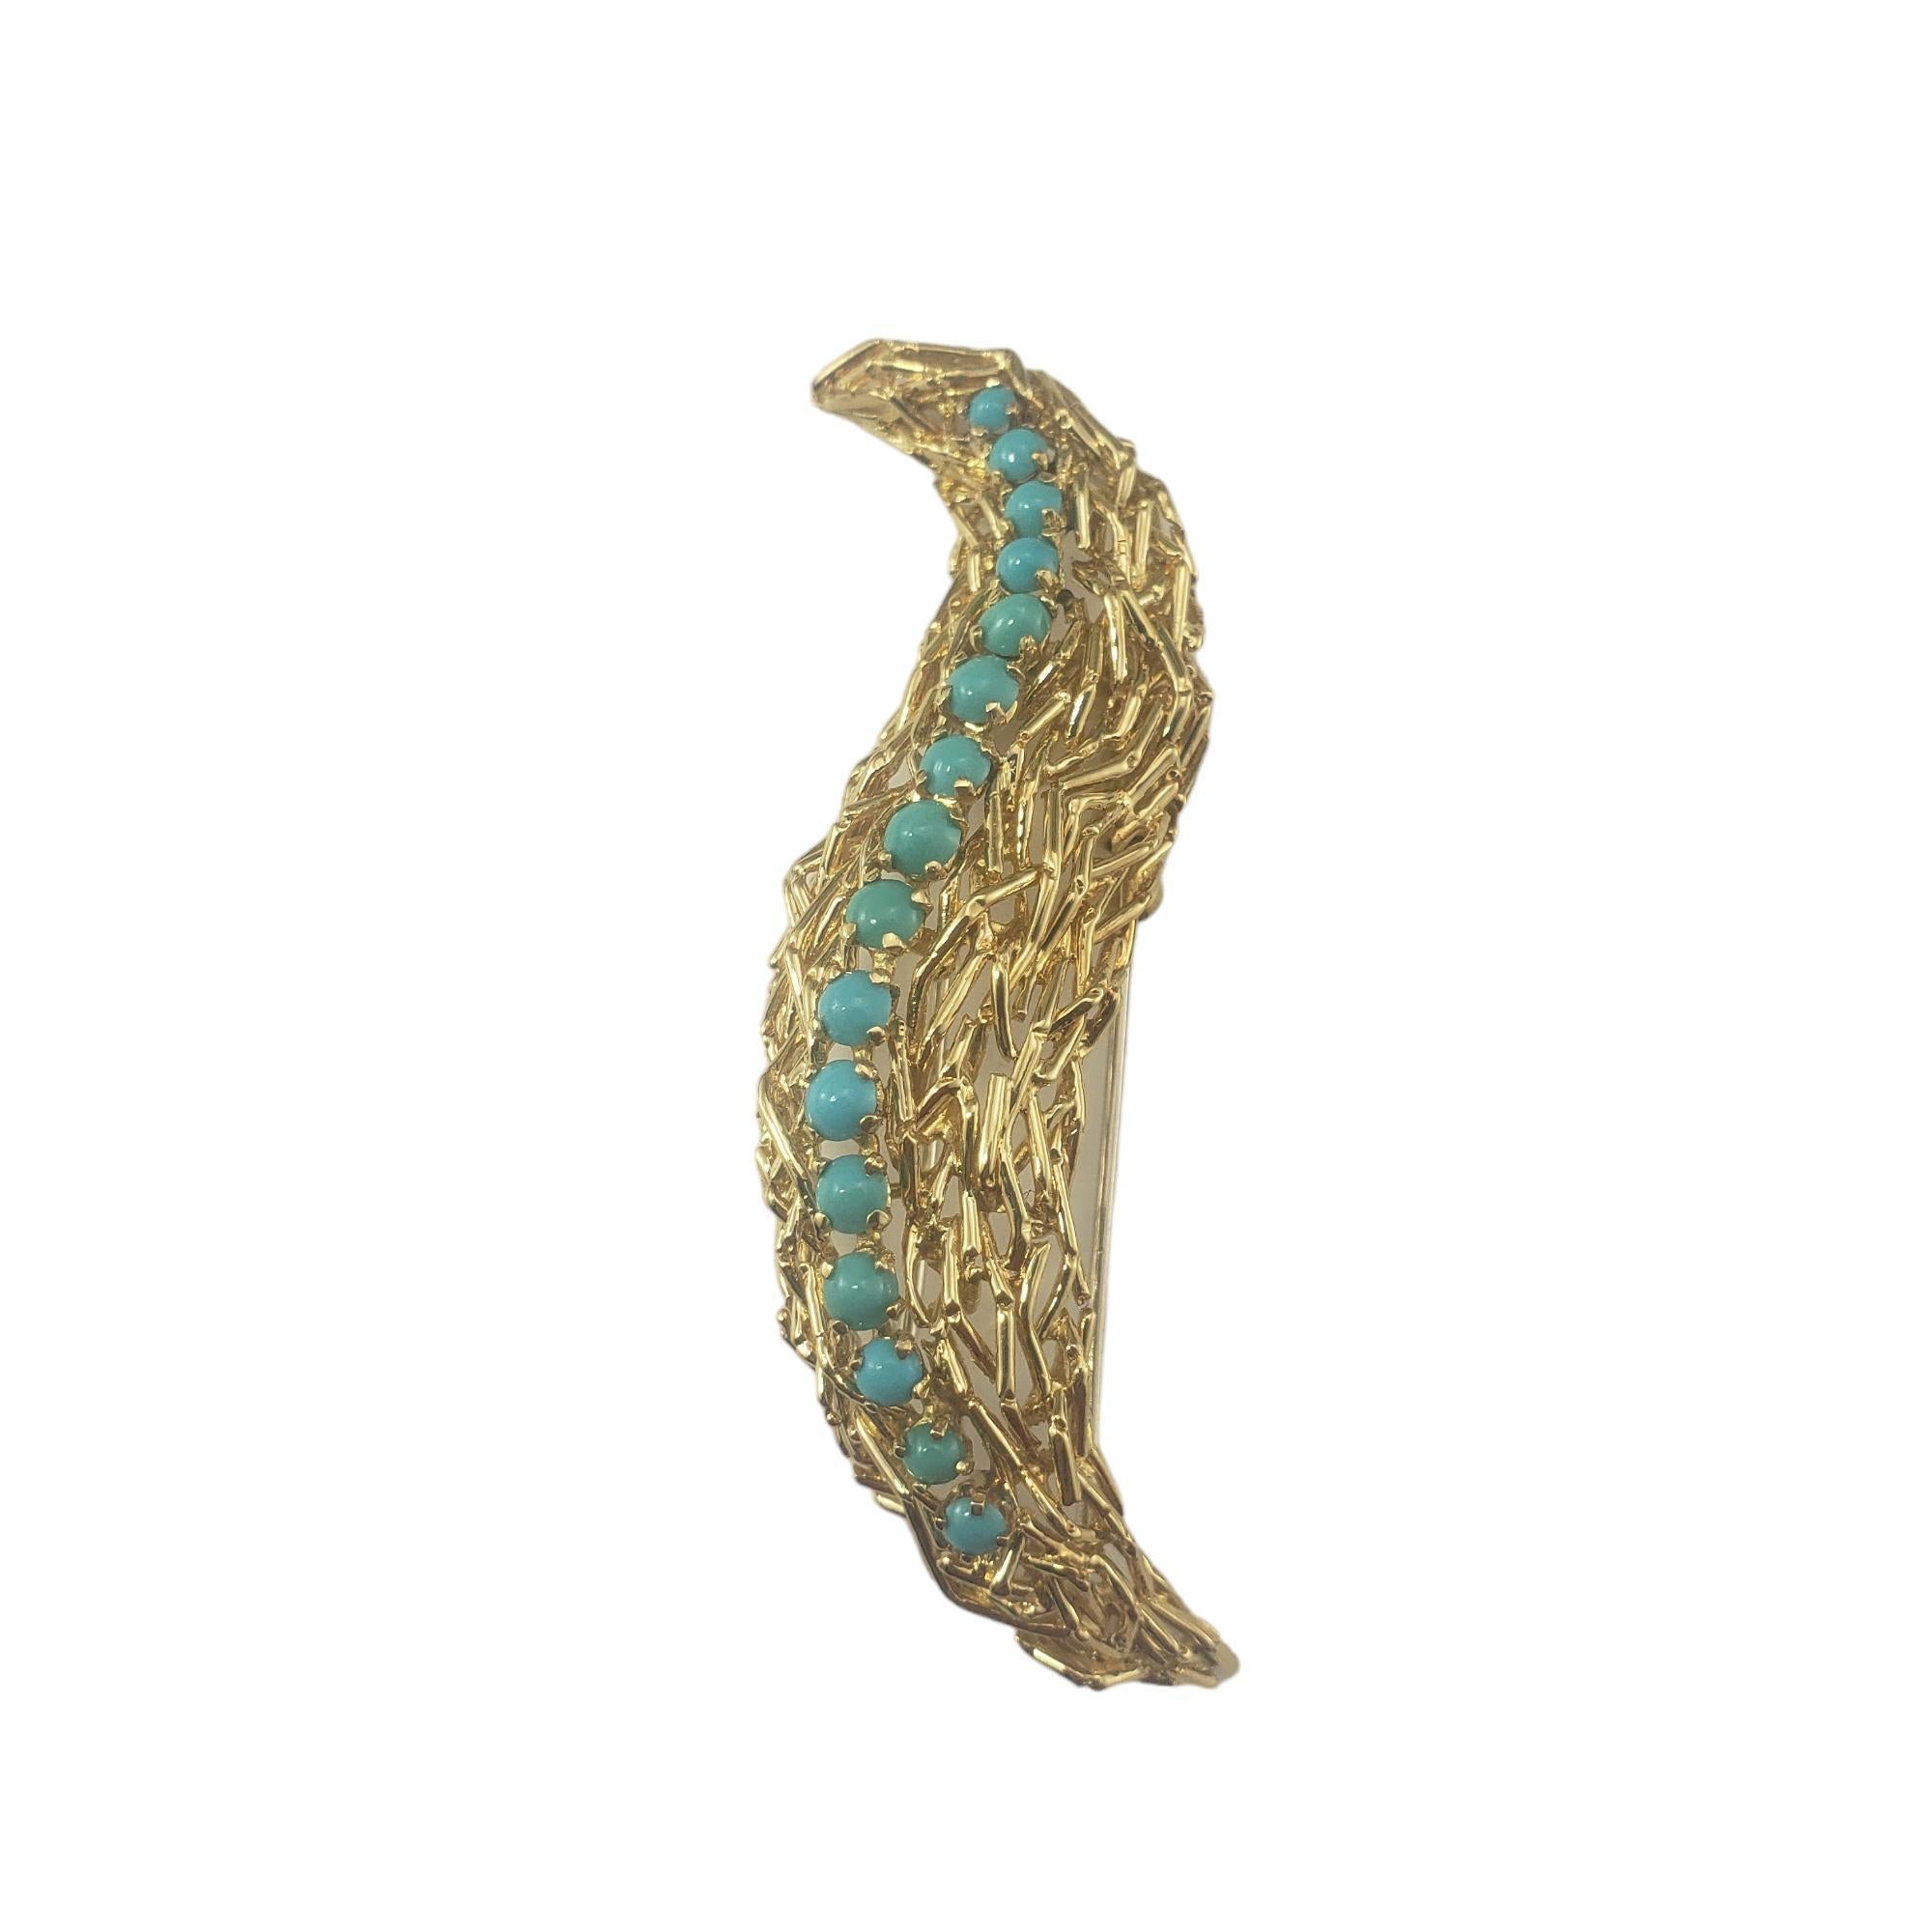 Tiffany & Co. 18 Karat Yellow Gold and Turquoise Brooch/Pin #16802 In Good Condition For Sale In Washington Depot, CT